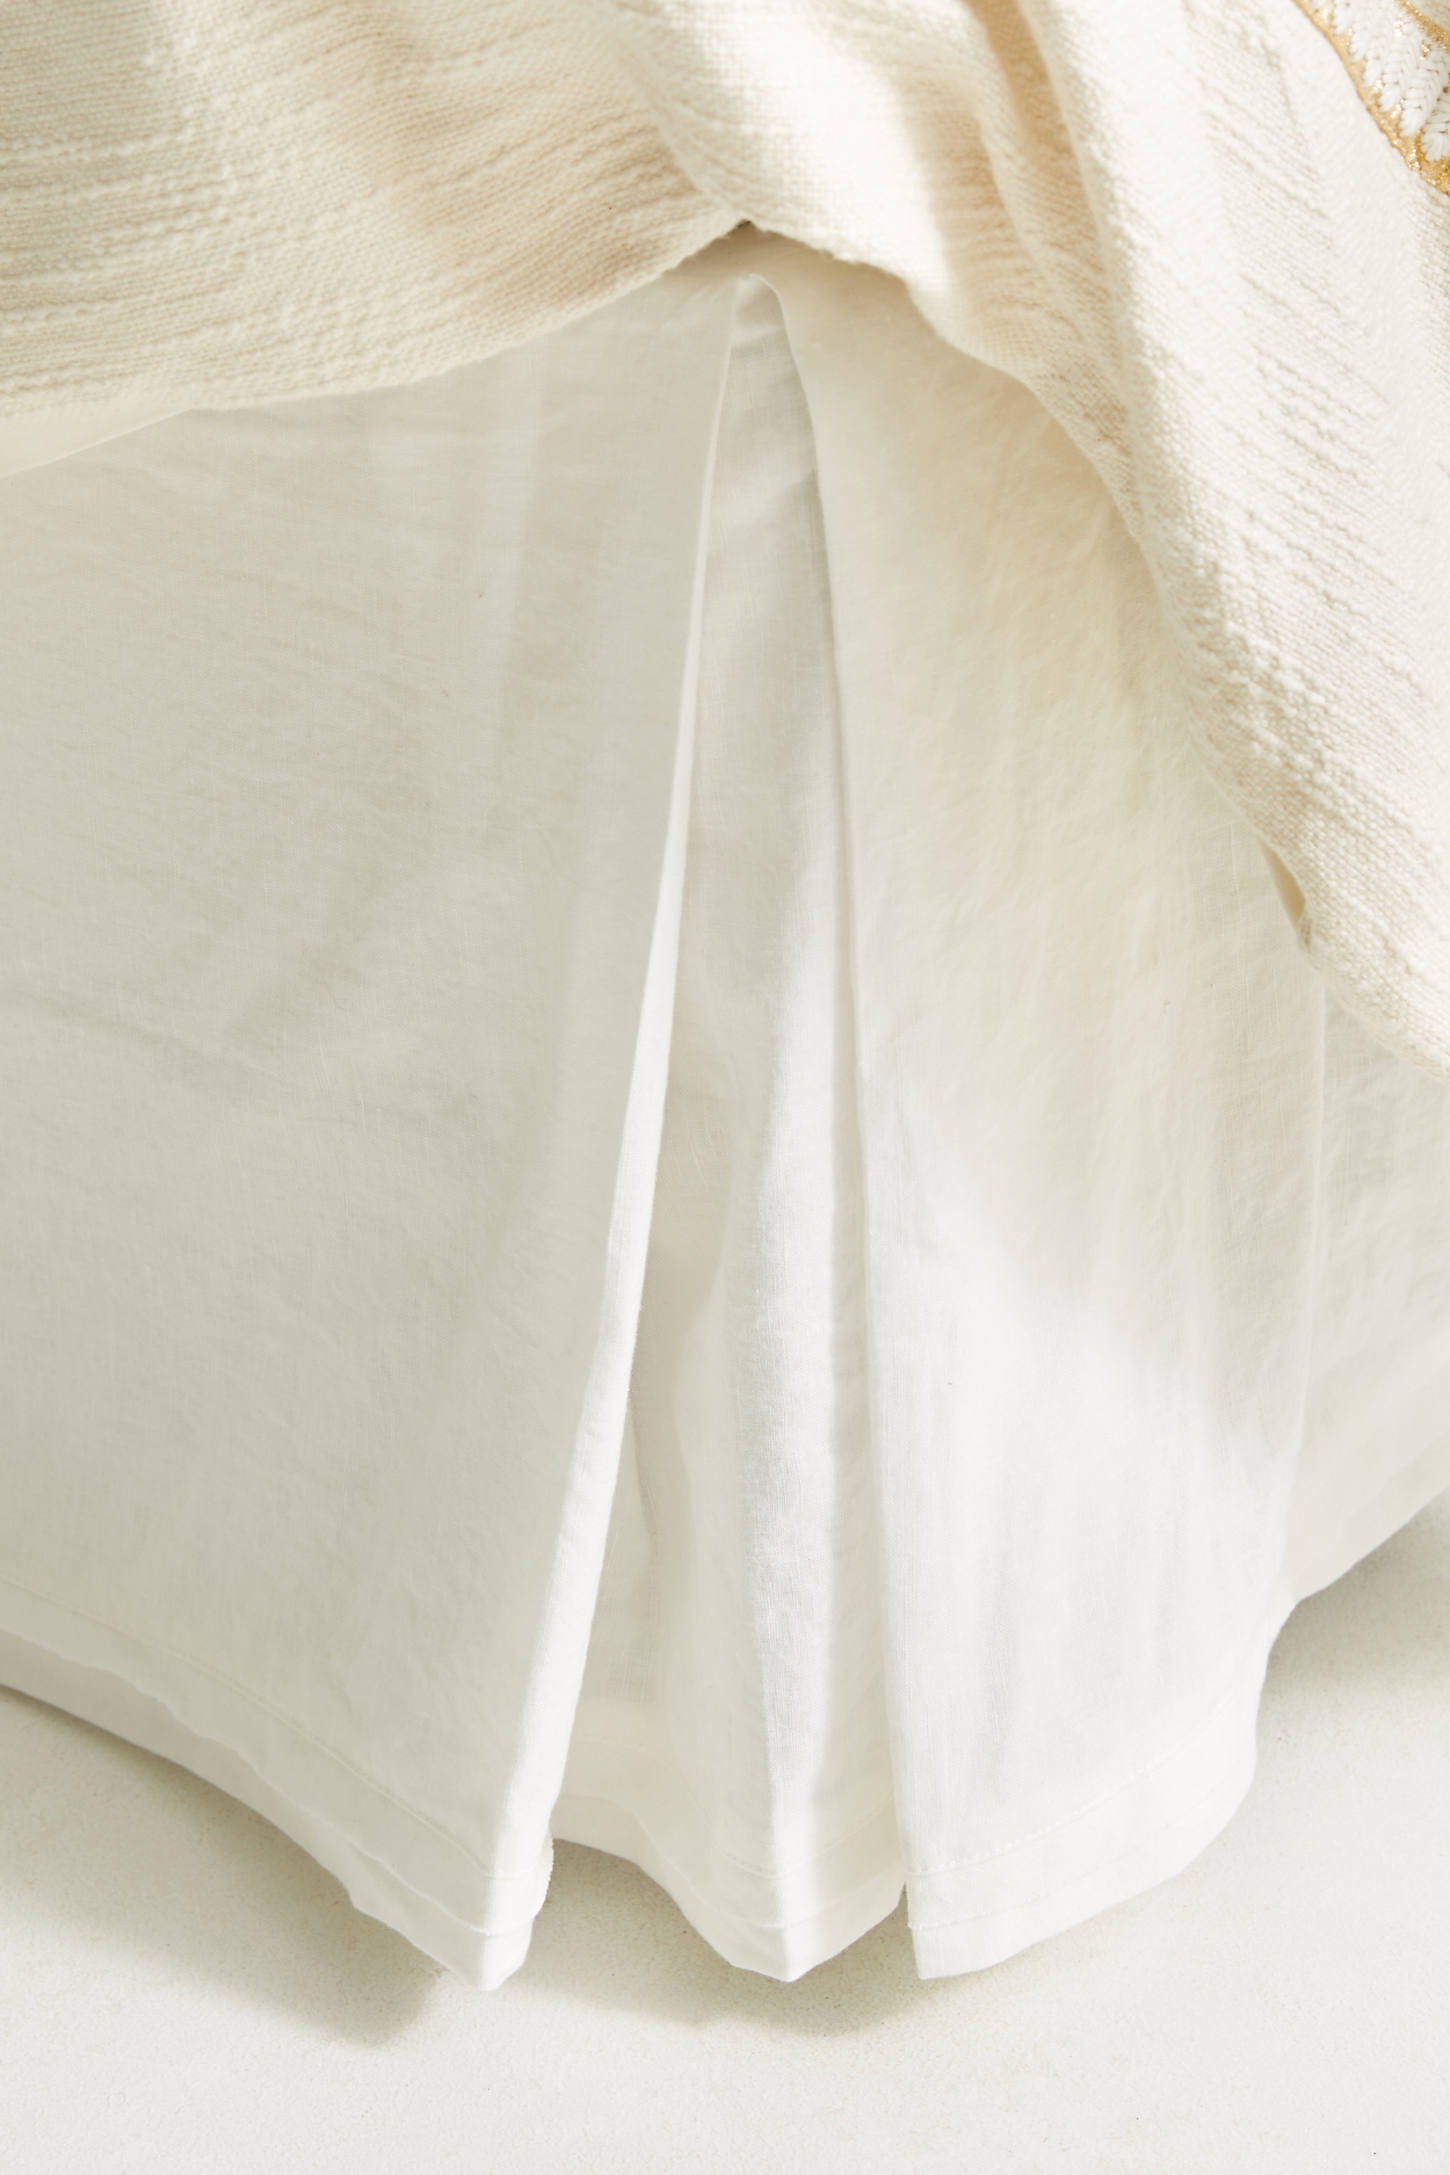 Relaxed Cotton-Linen Bed Skirt - Image 0